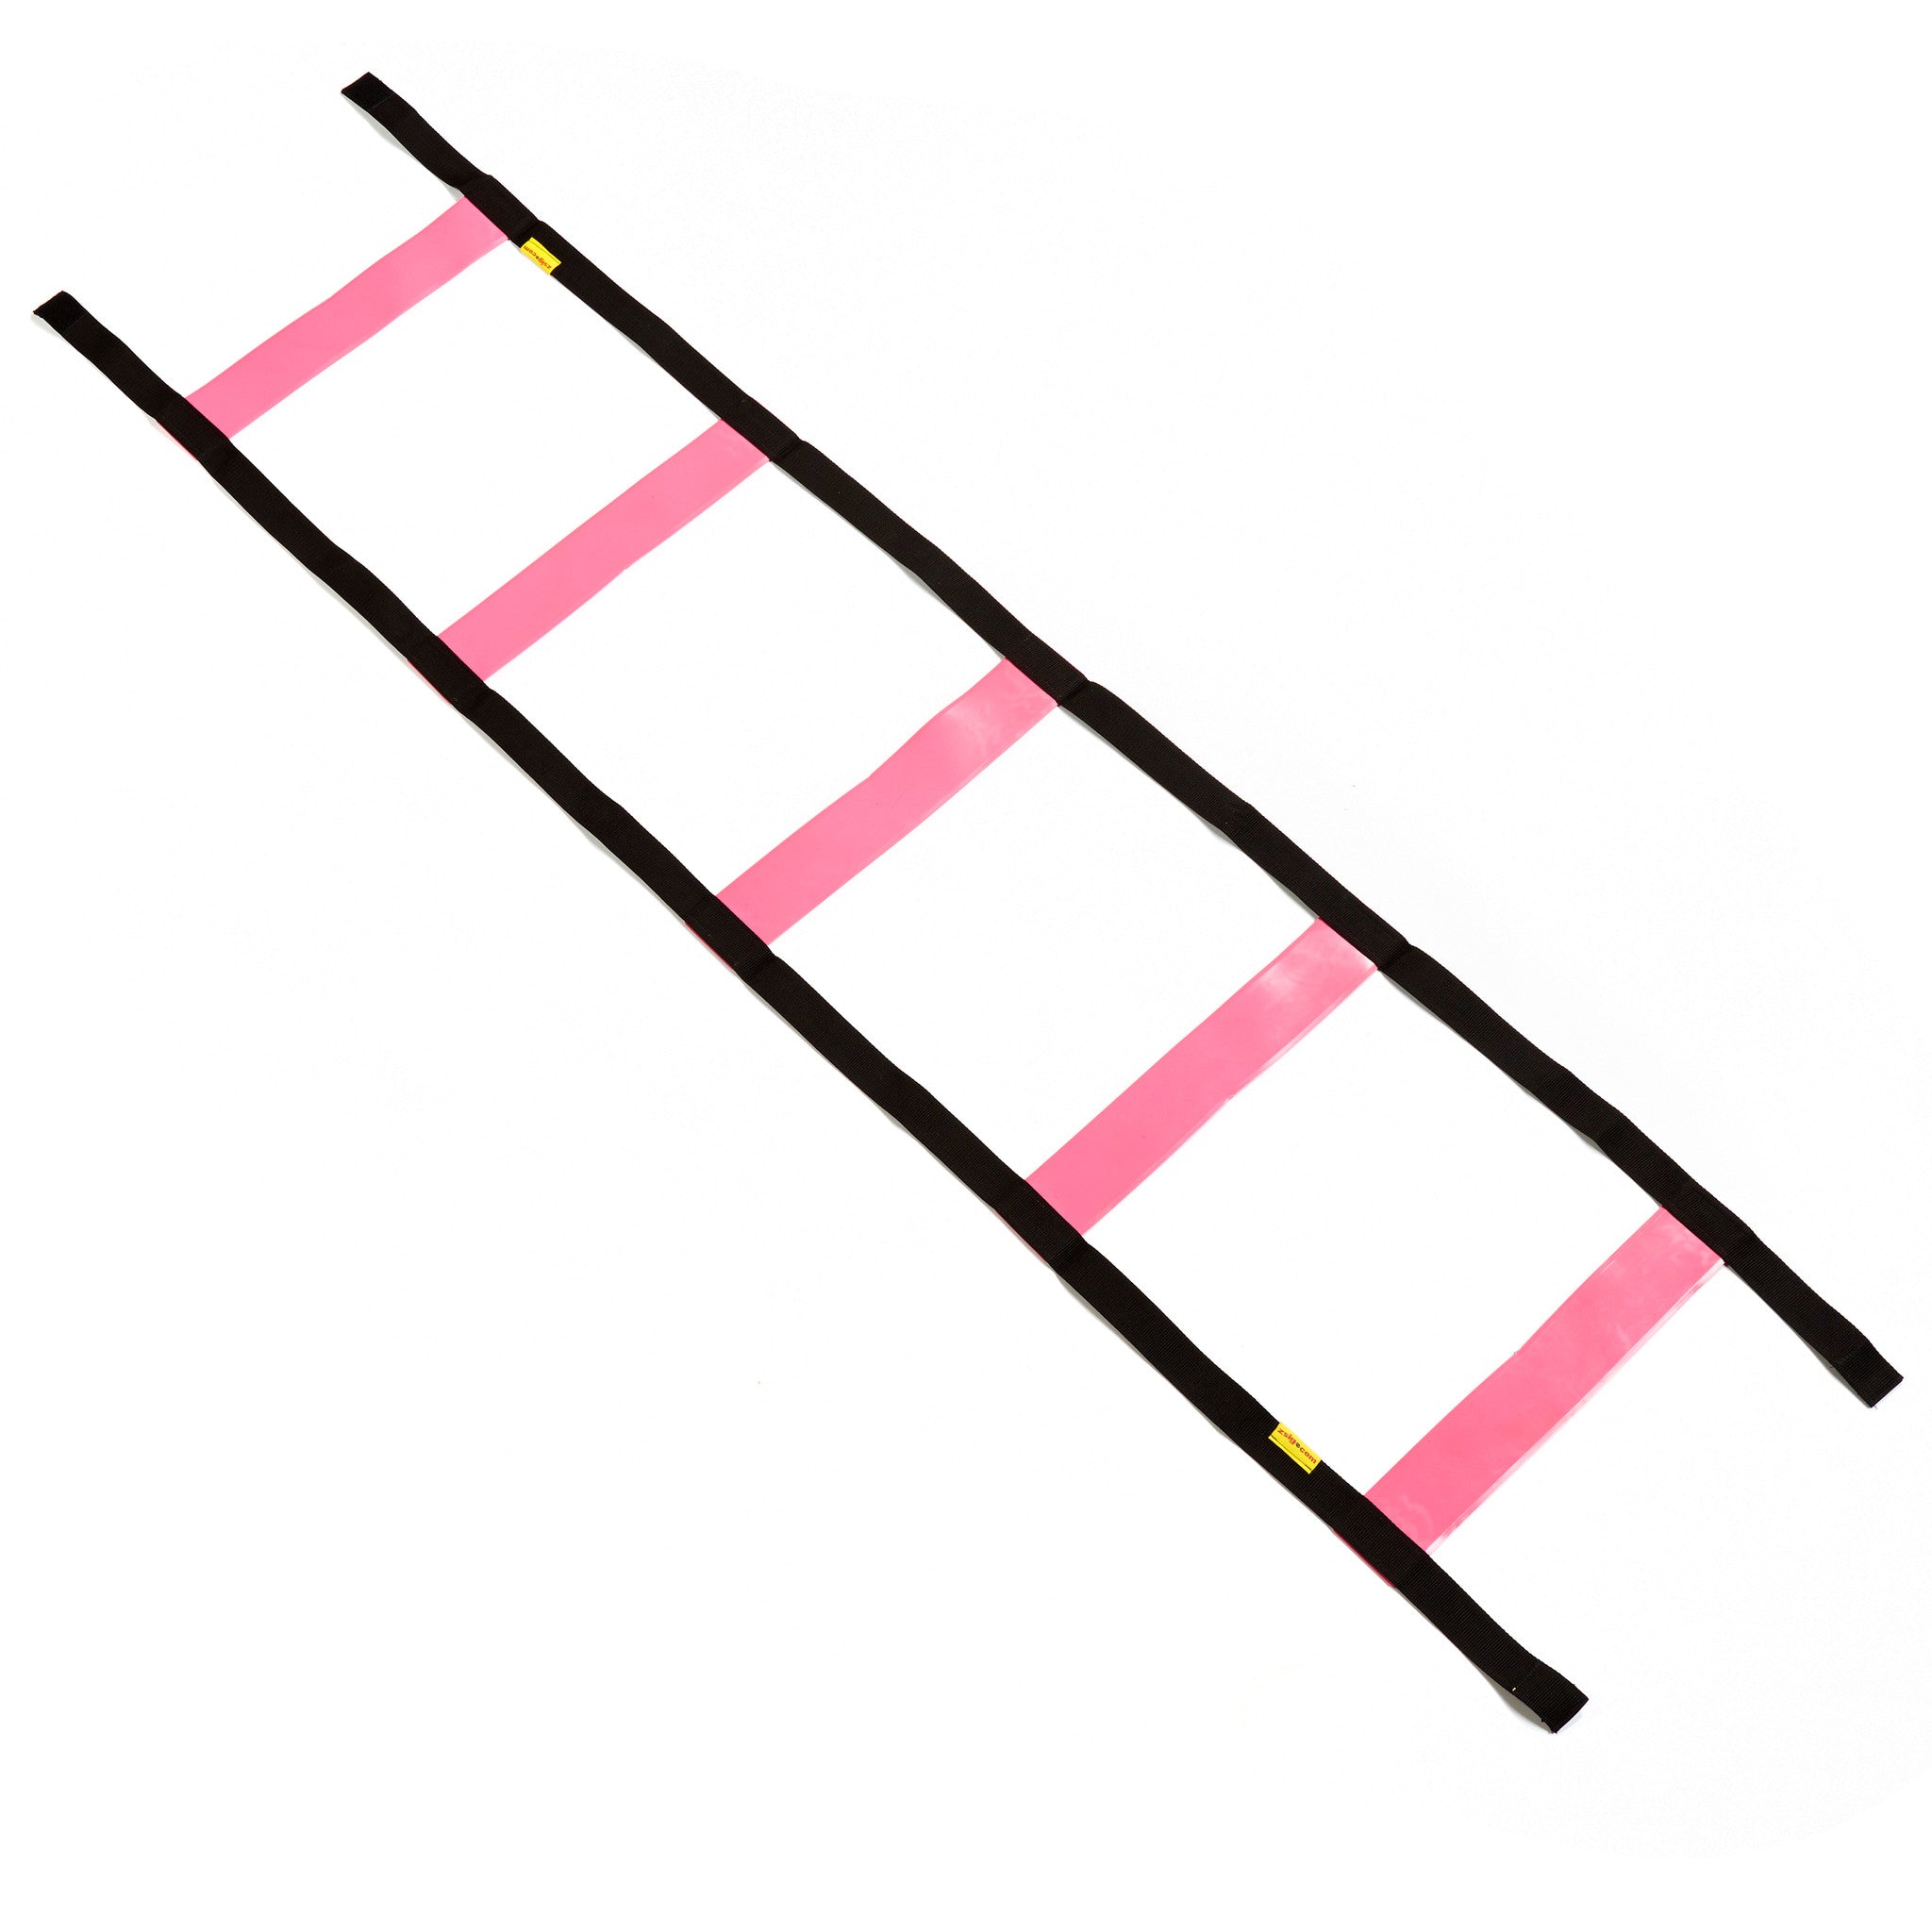 2m safety agility ladder for young children